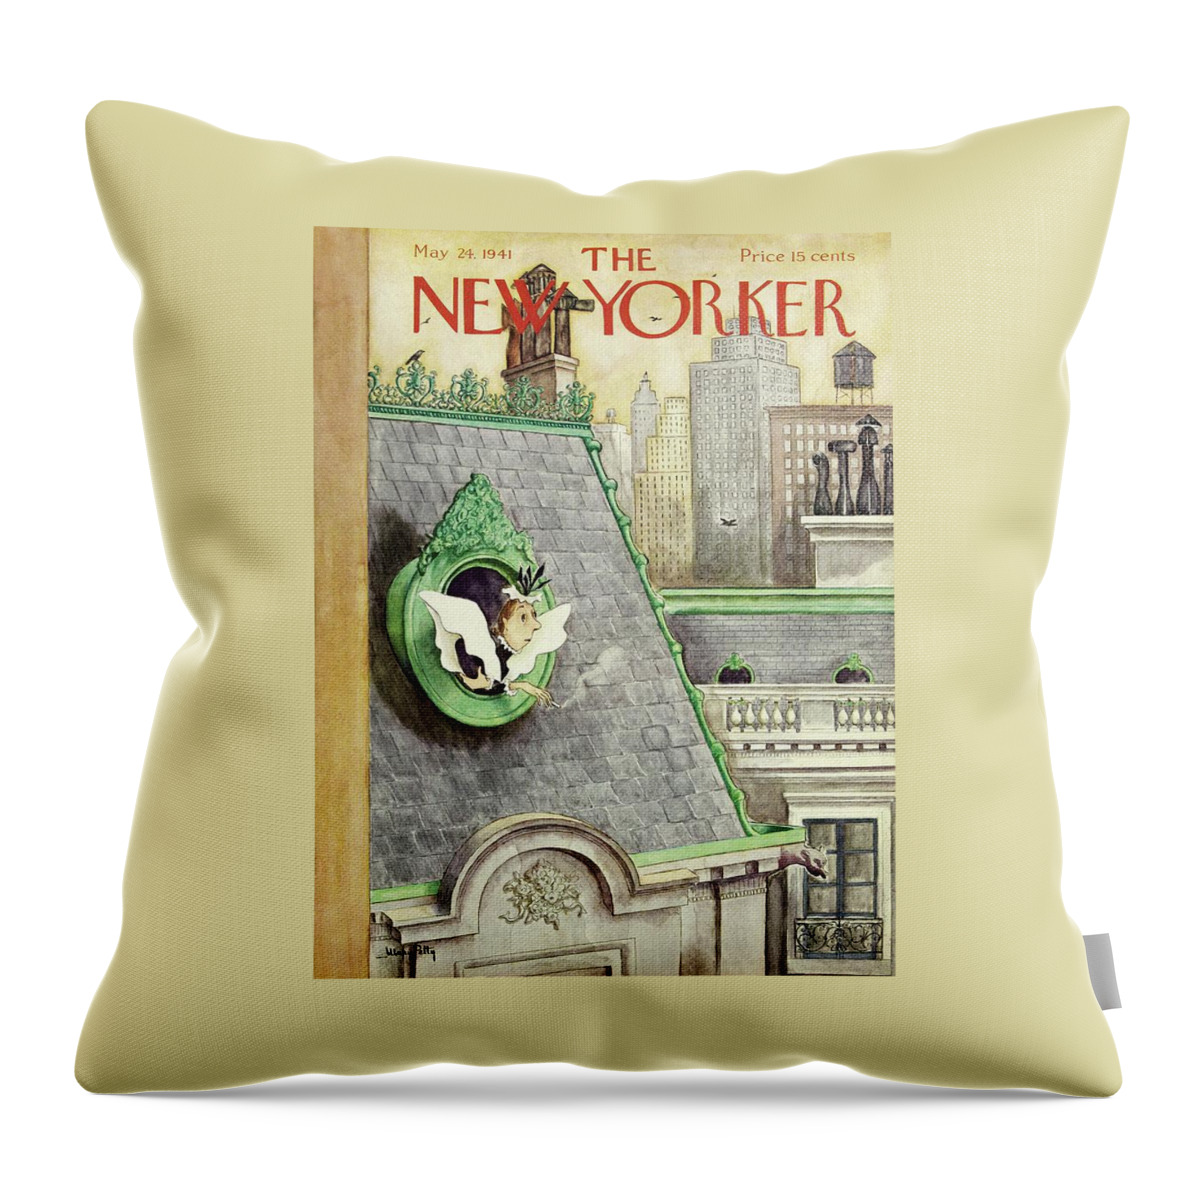 New Yorker May 24 1941 Throw Pillow